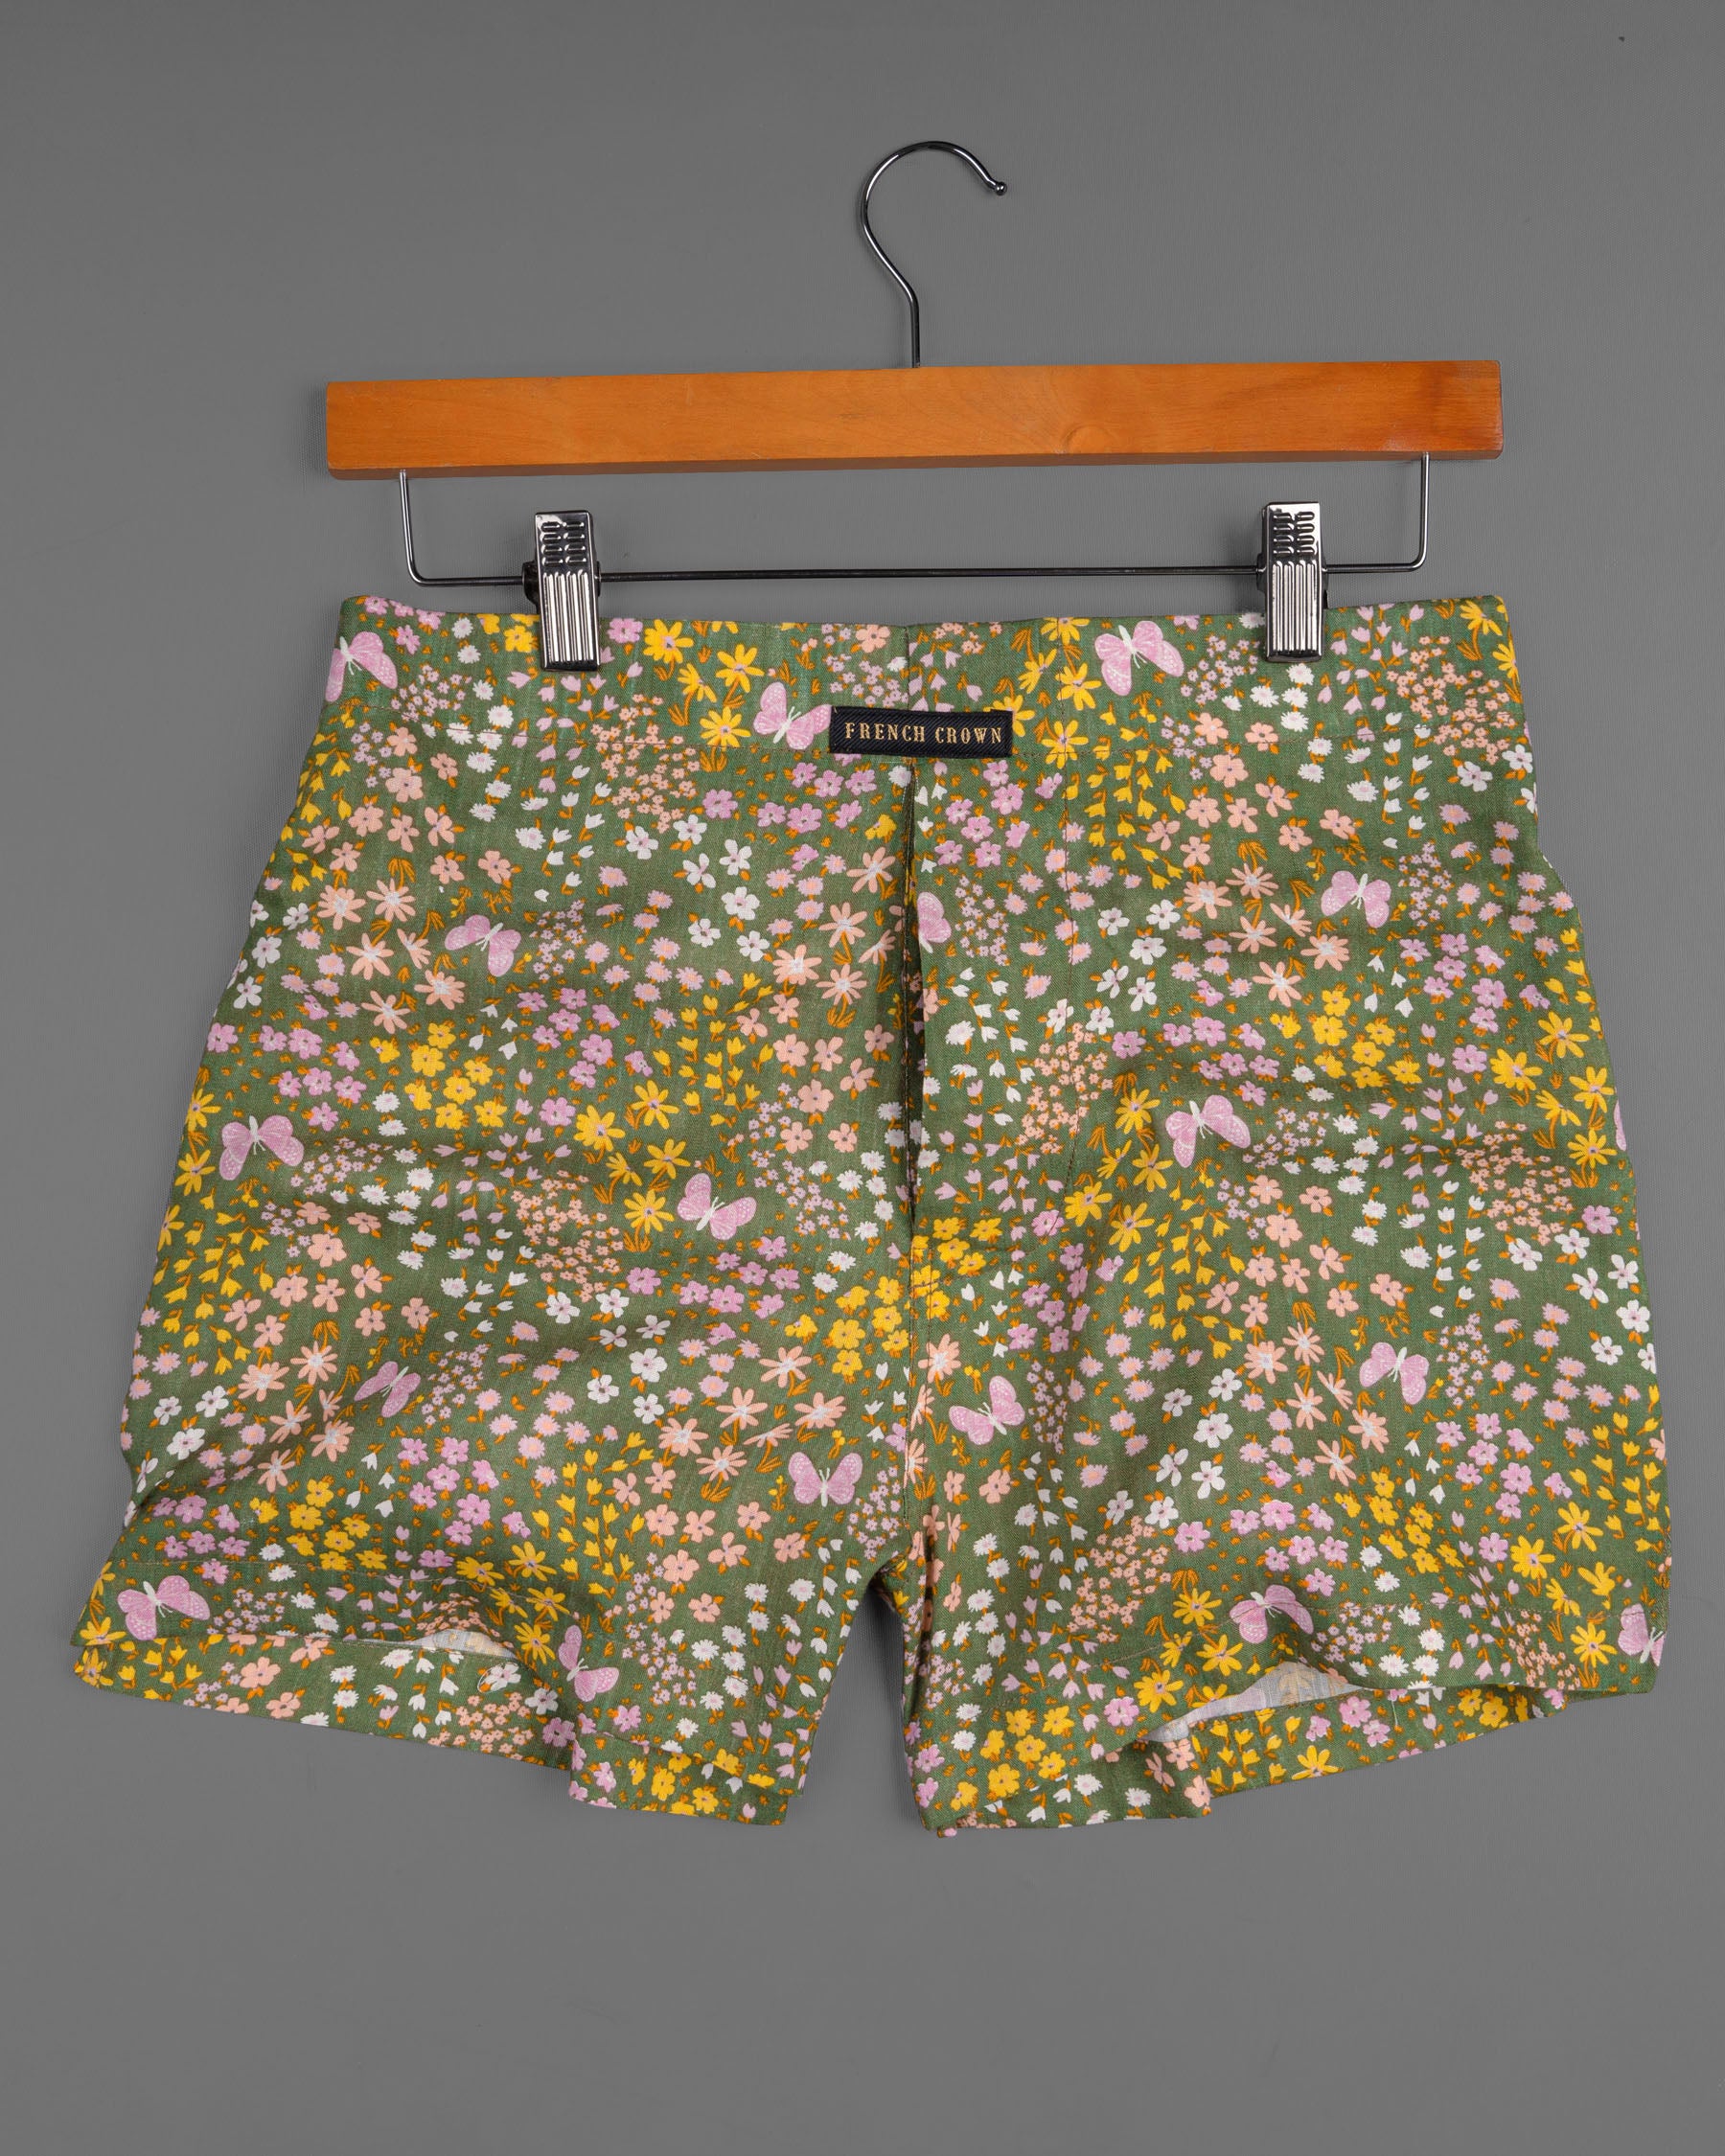 Bright White and Tamarillo Red with Camouflage Green and Saffron Floral Printed Premium Tencel Boxers CBX422-28, CBX422-30, CBX422-32, CBX422-34, CBX422-36, CBX422-38, CBX422-40, CBX422-42, CBX422-44